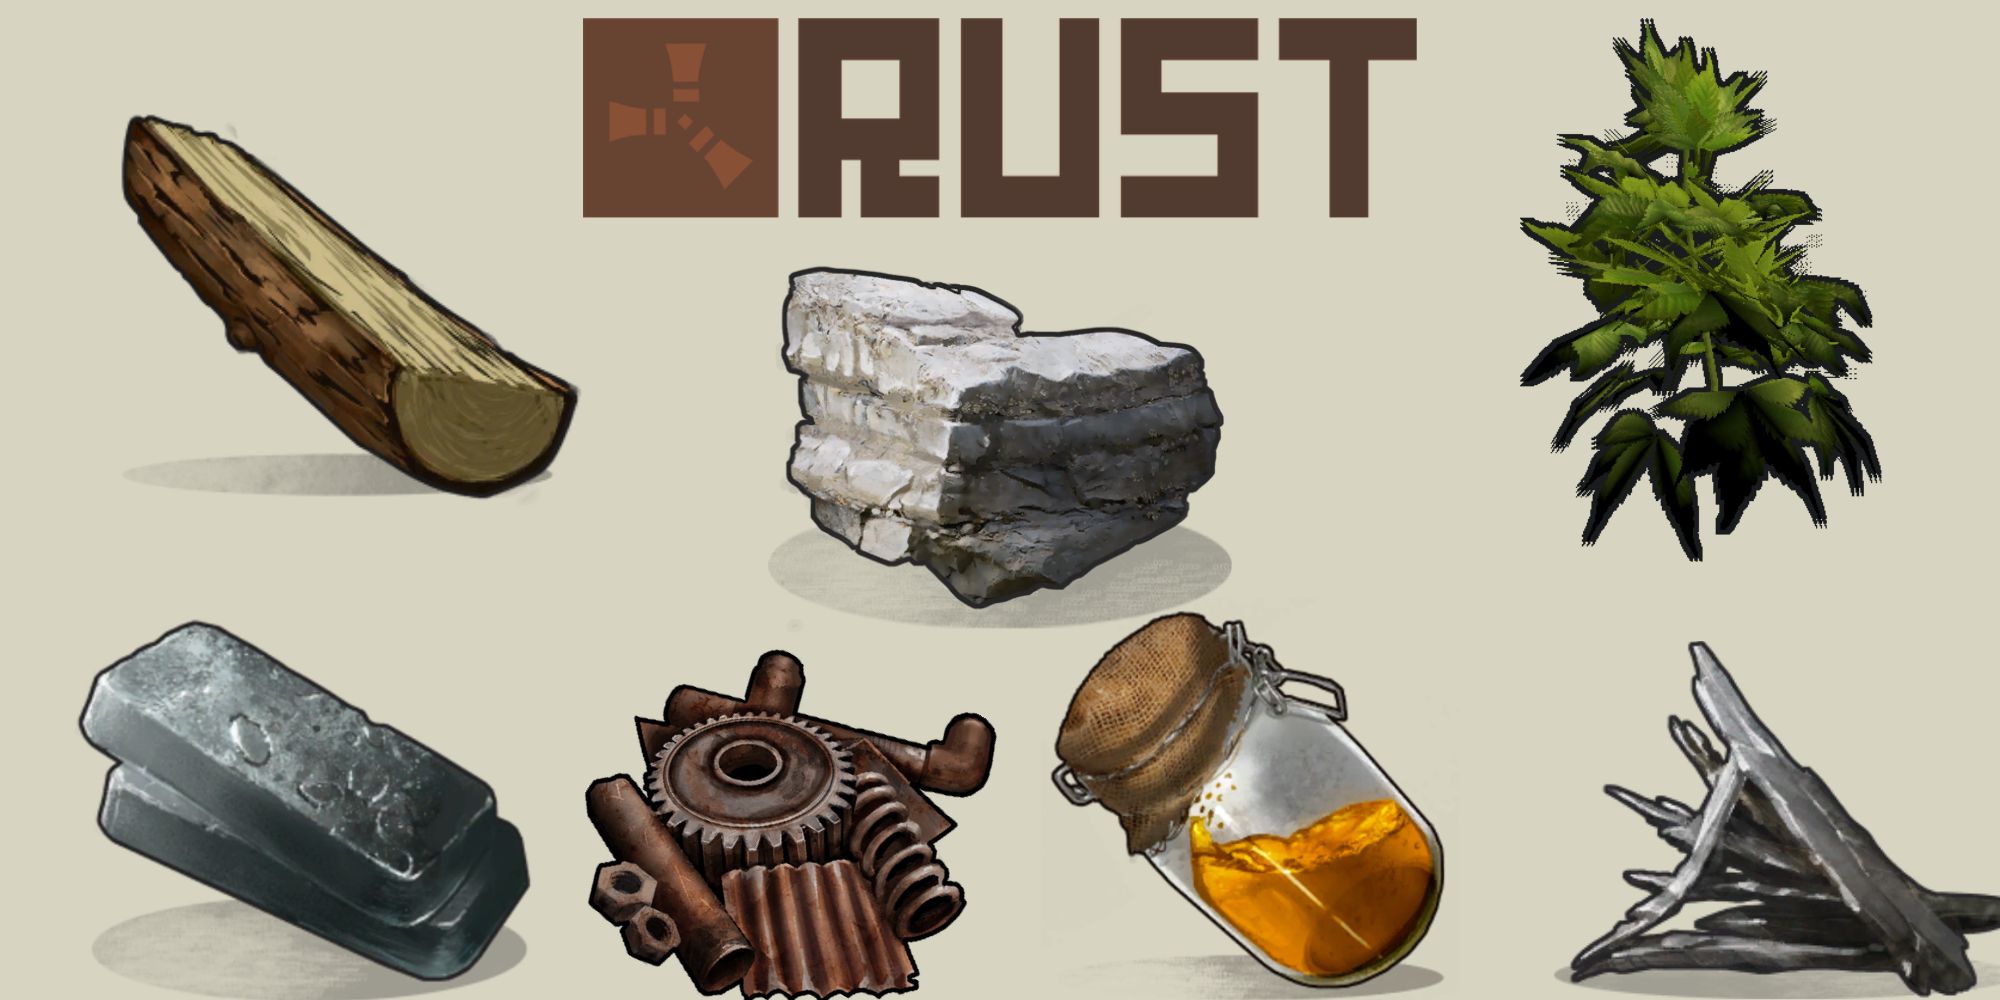 rust console edition update